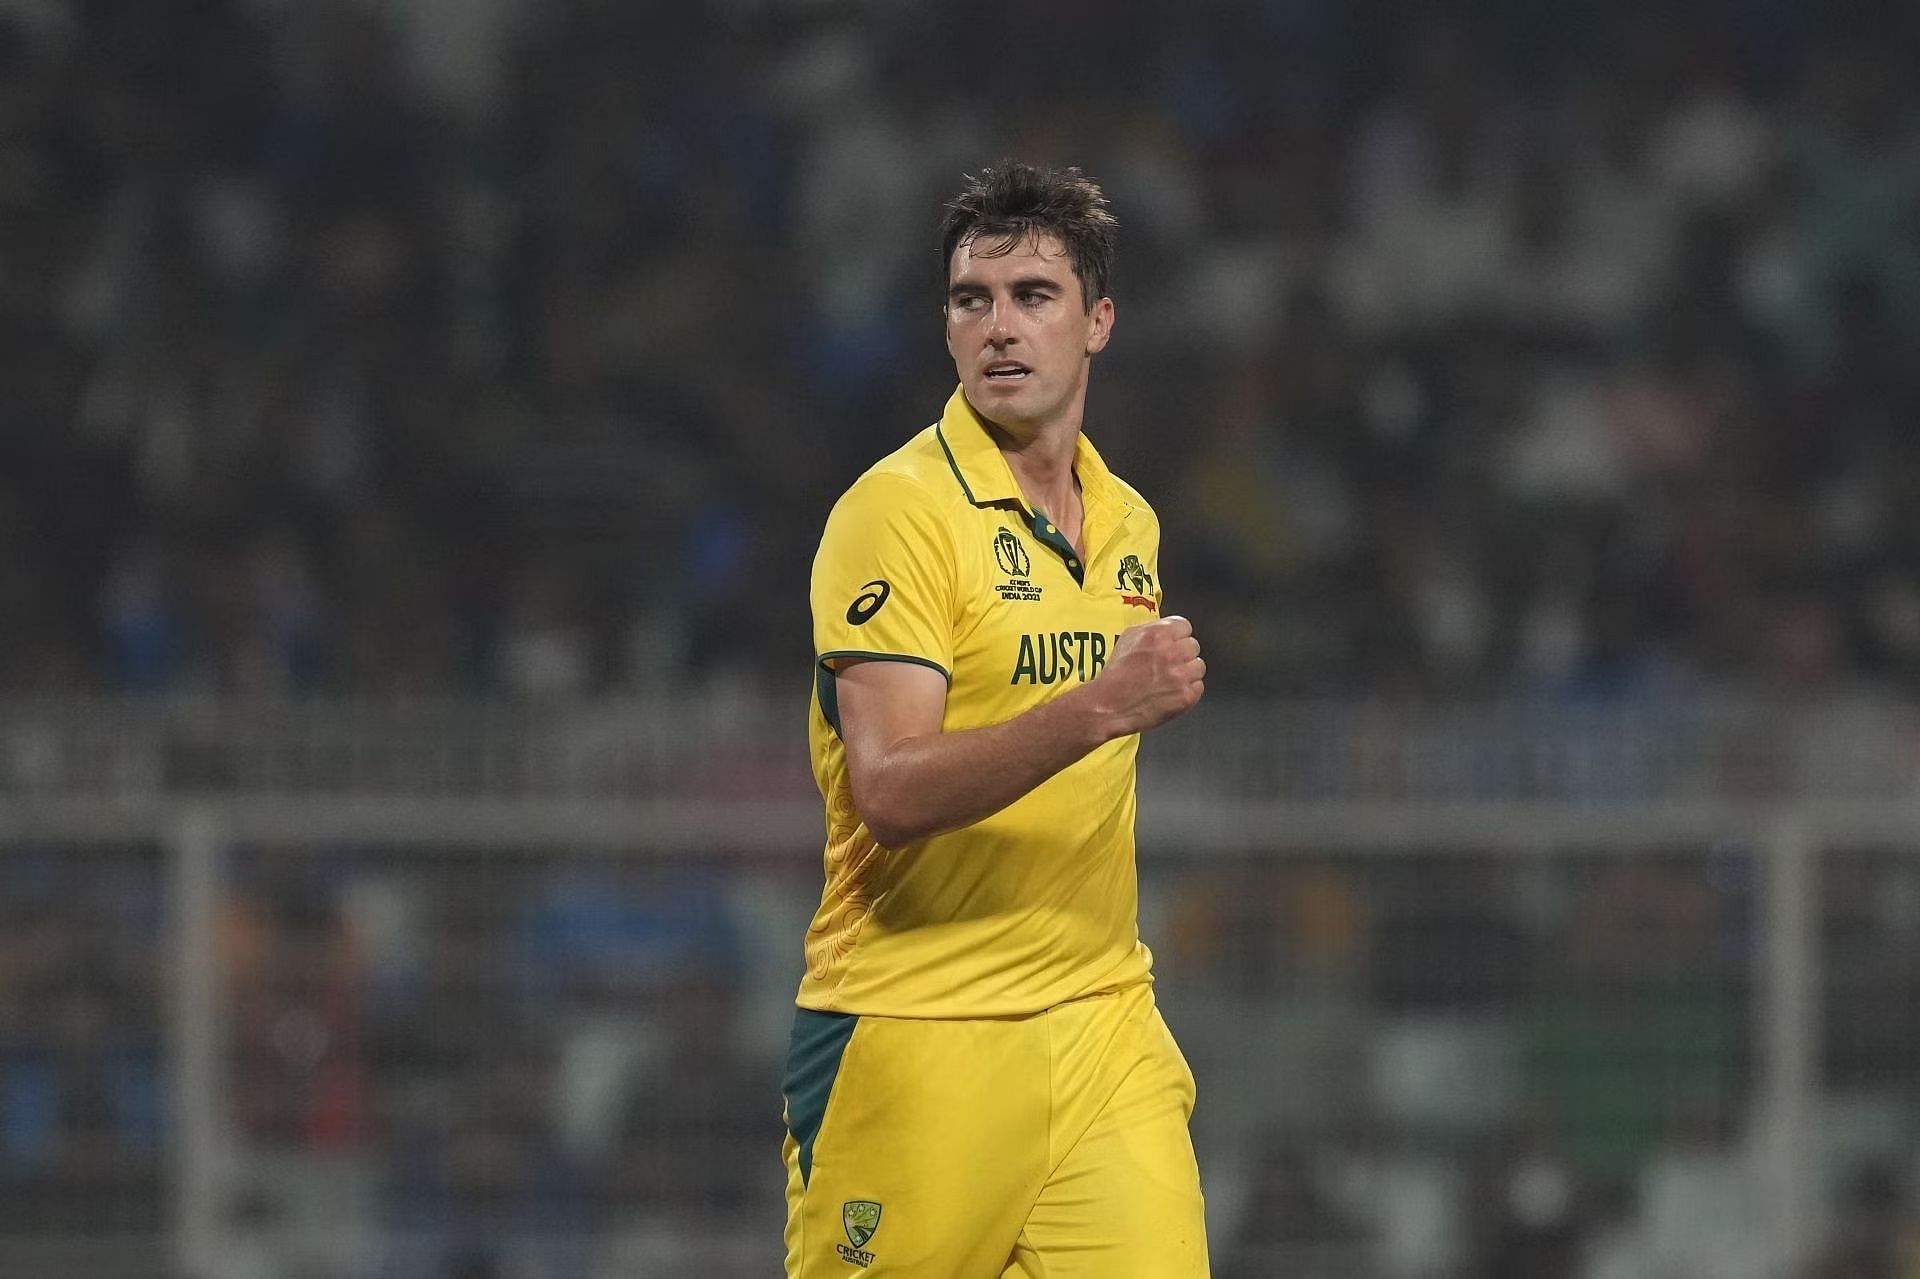 Pat Cummins became the first player to be bought for more than 20 crore rupees at an IPL auction. [P/C: Getty]